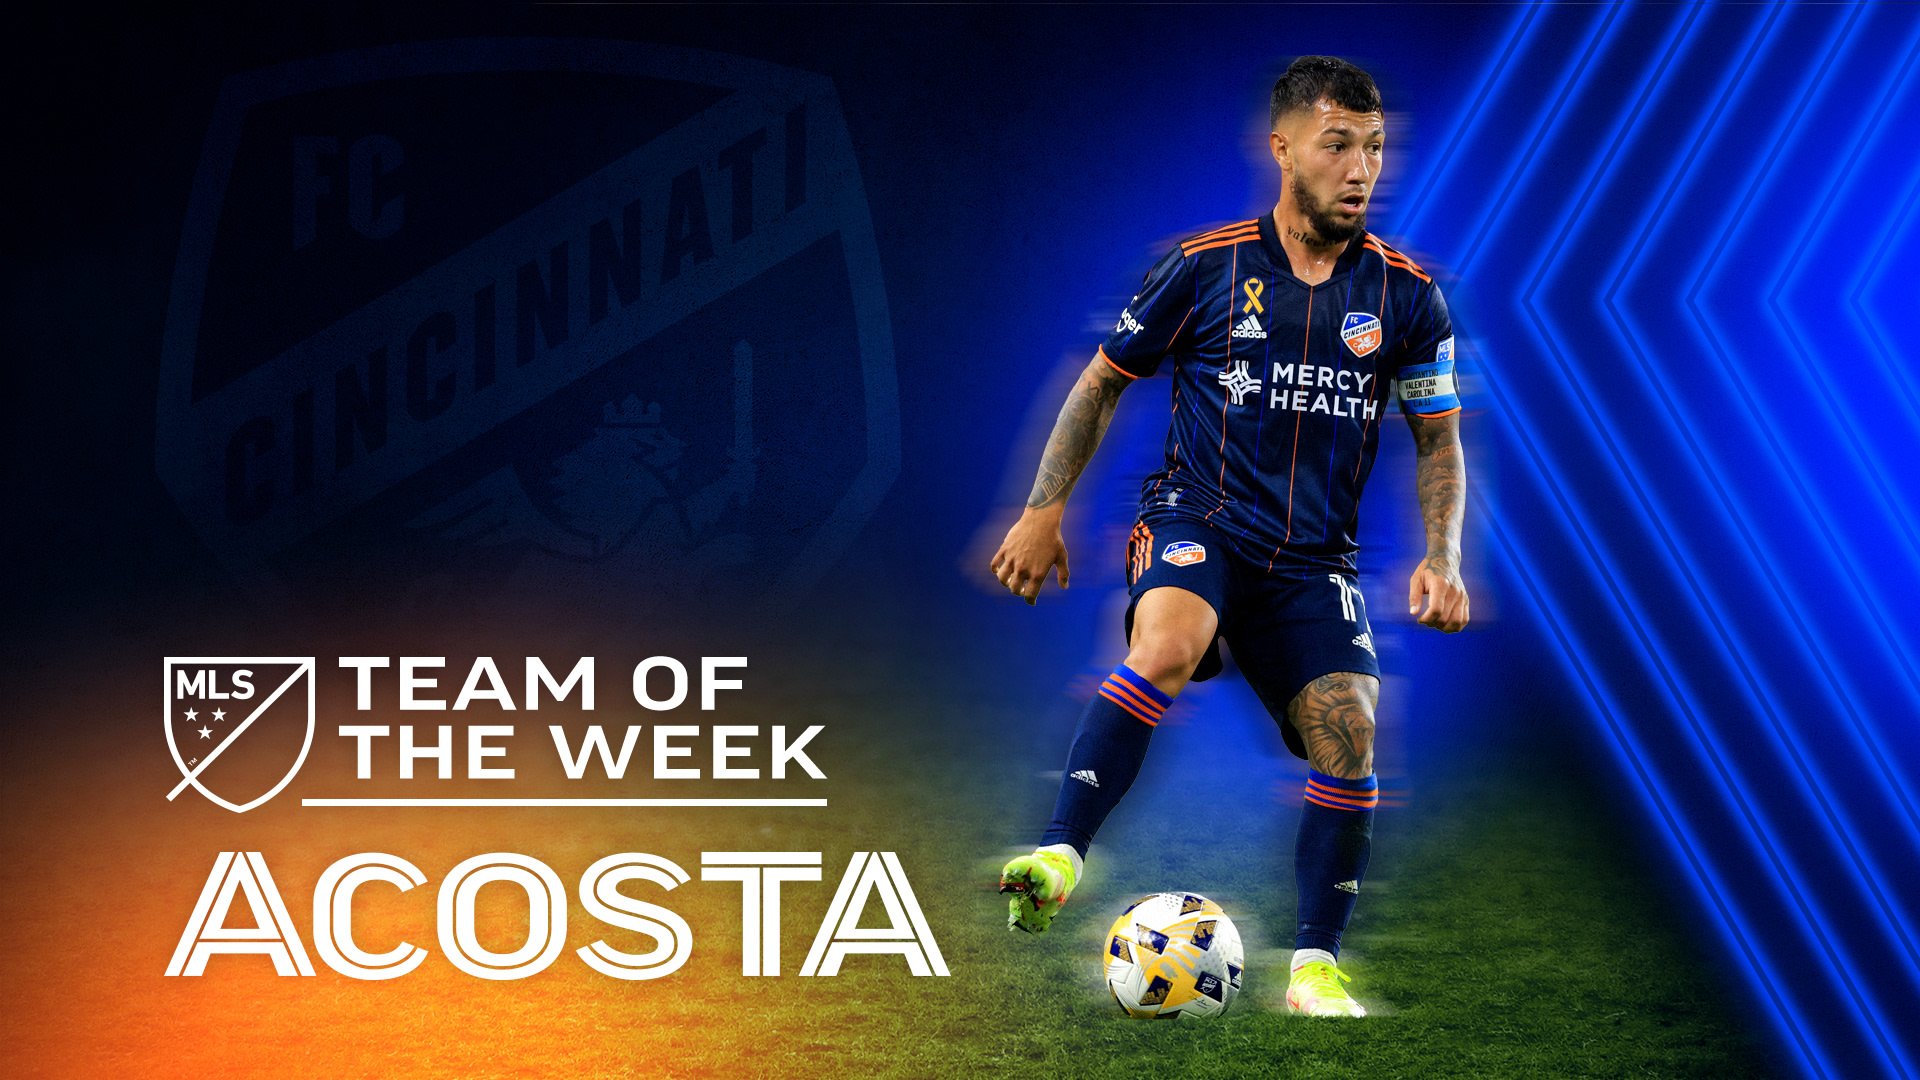 Luciano Acosta earns MLS Team of the Week Honors